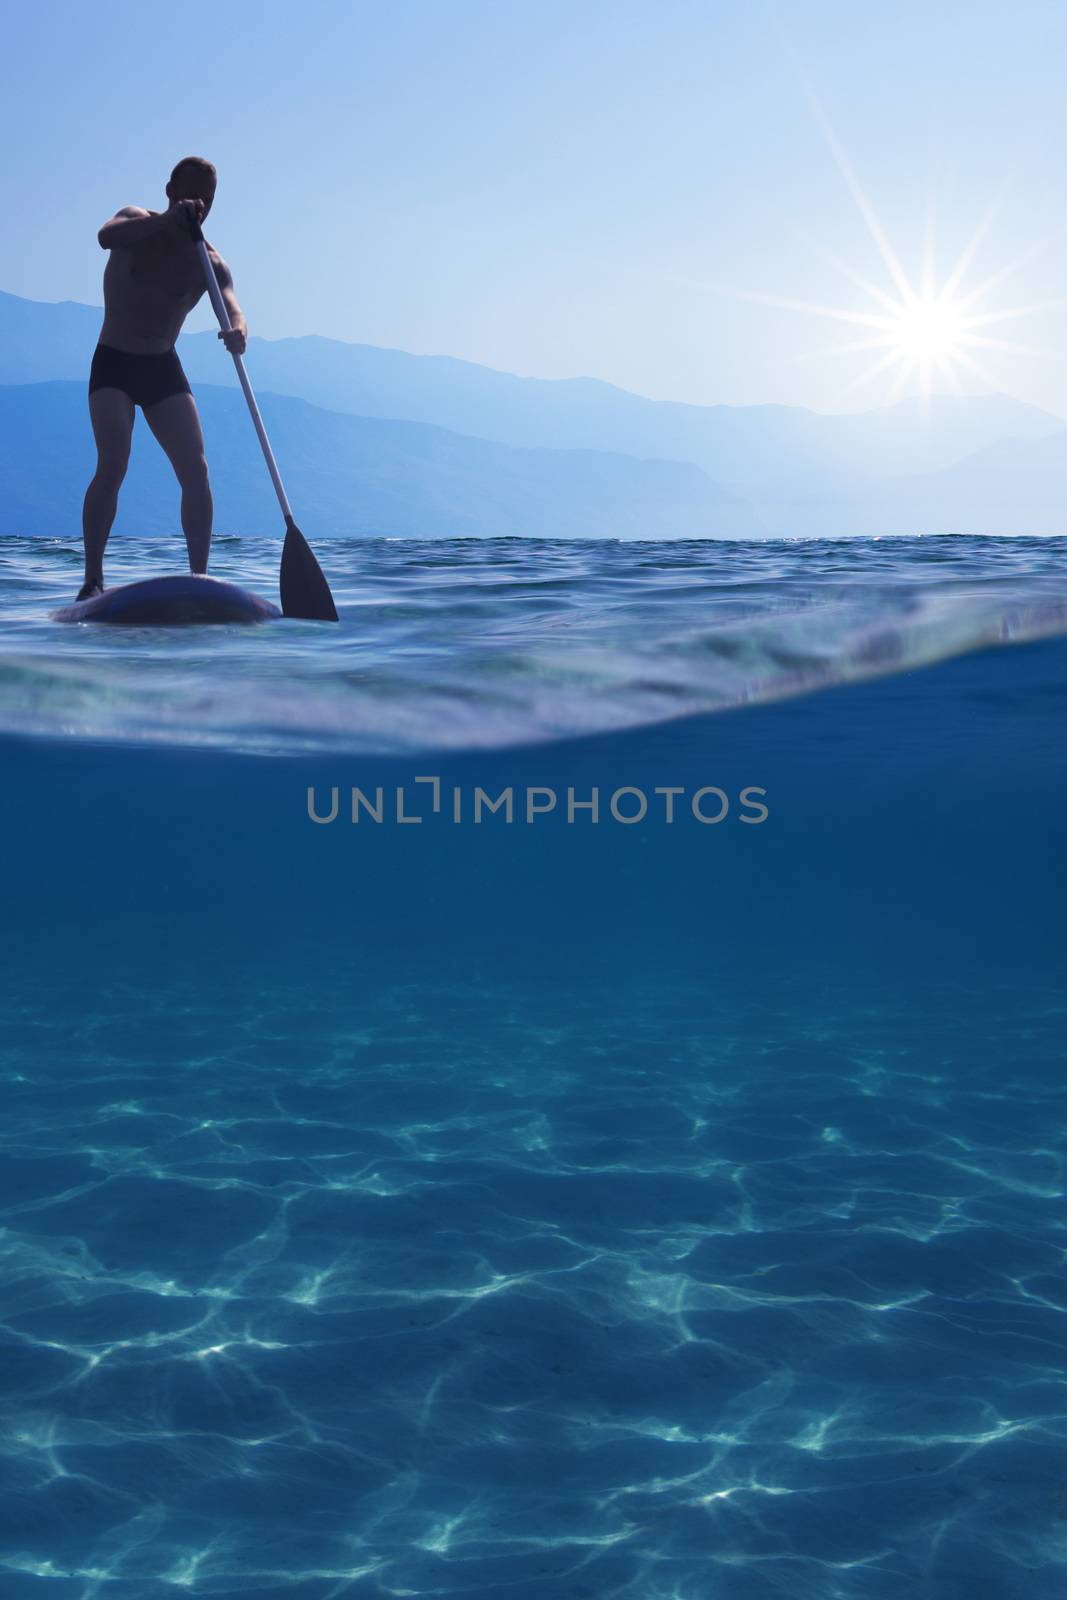 Stand up paddle boarding by destillat